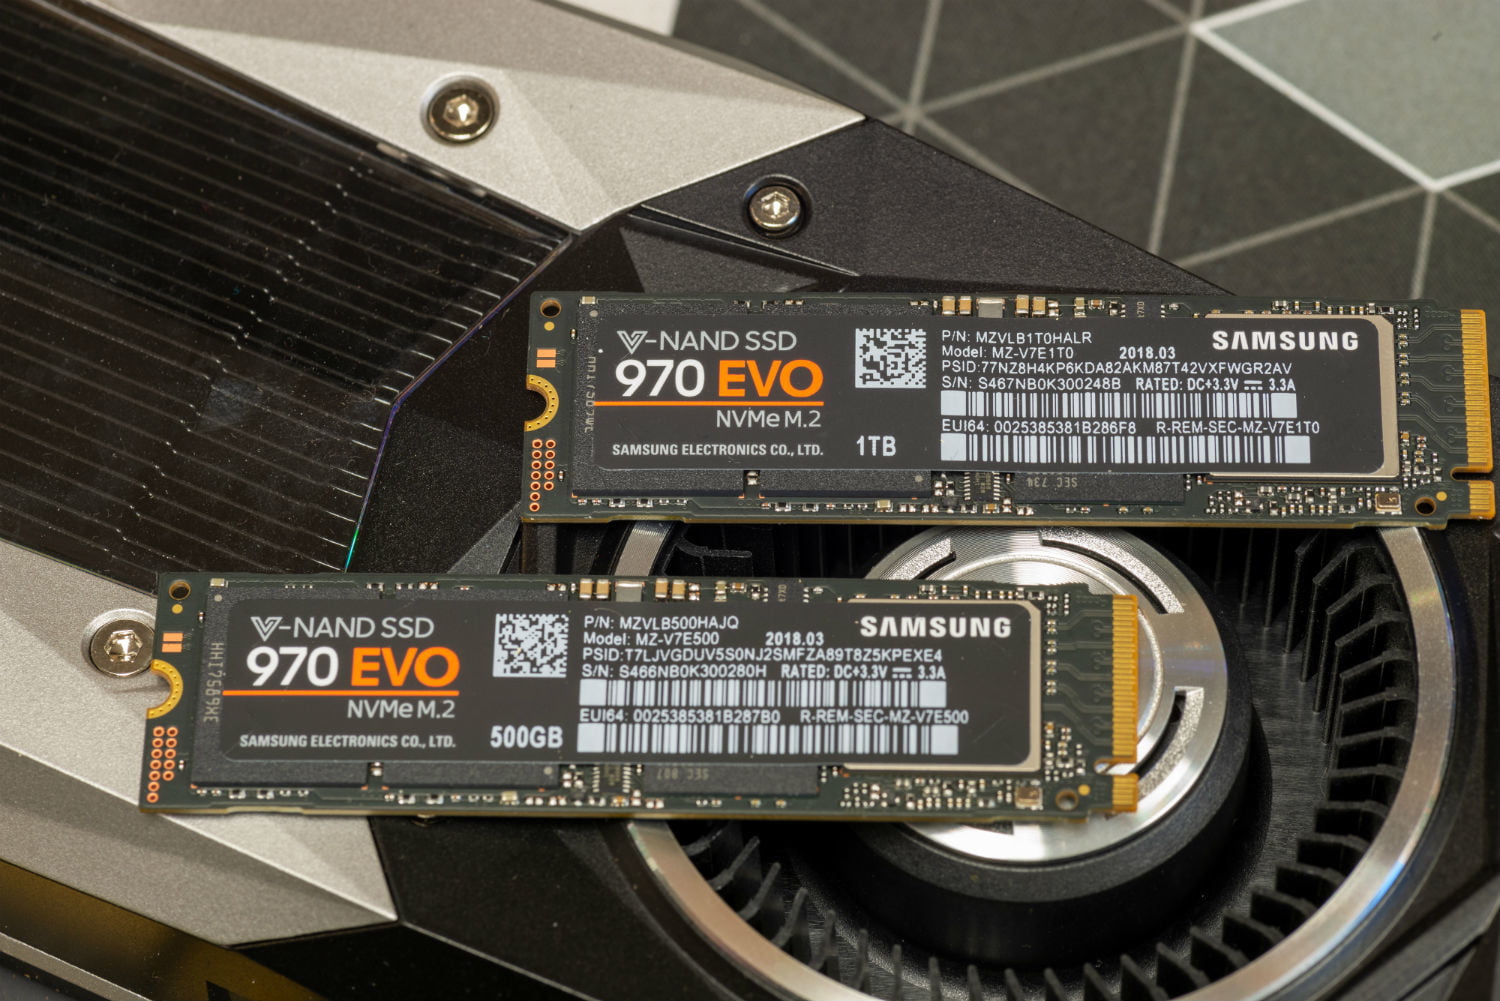 Samsung 970 EVO Plus review: a great SSD and a genuine evolution